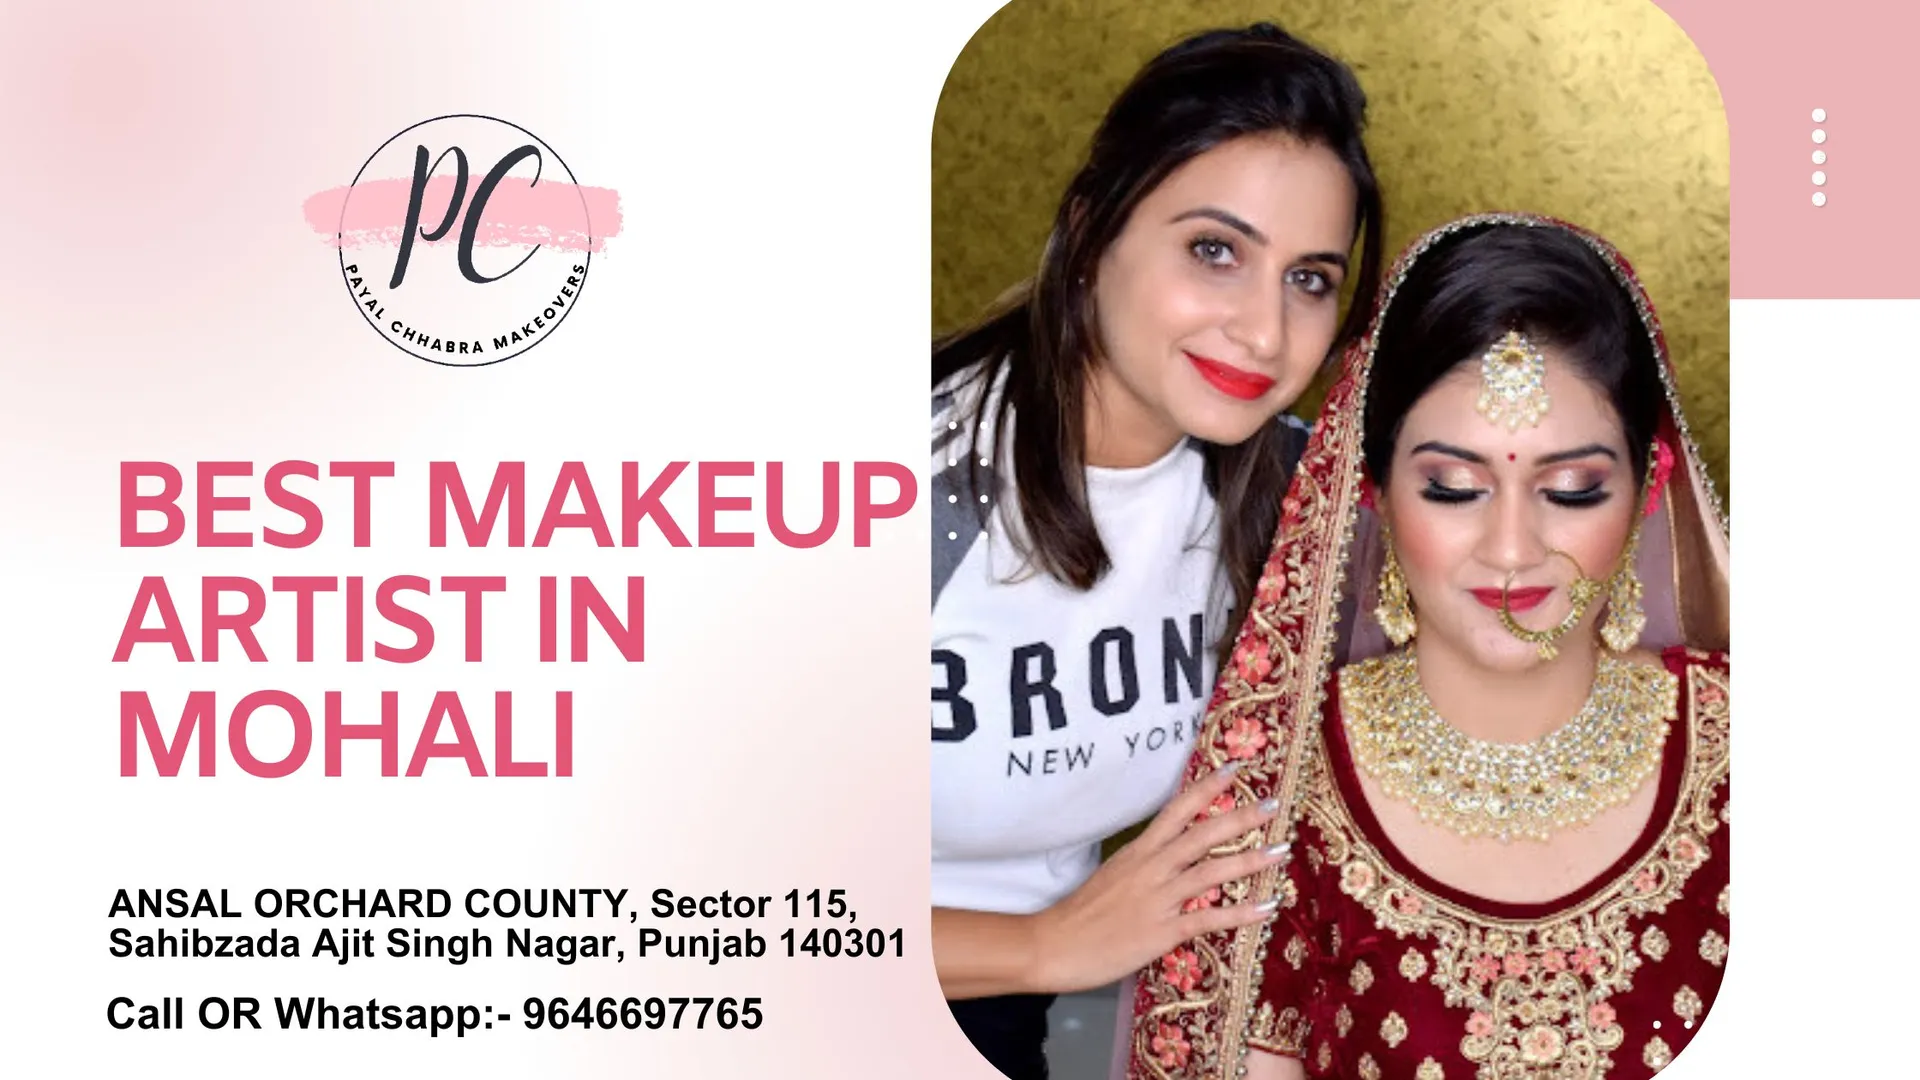 Discover your true beauty with Payal Chhabra Makeovers, the leading makeup artist in Mohali. With an unparalleled passion for enhancing natural beauty, Payal Chhabra brings out the best in every individual. Her artistic flair and skilled techniques create captivating looks that leave a lasting impression.

Specializing in a wide range of makeup styles, from elegant bridal transformations to glamorous party makeovers, Payal Chhabra's expertise is unmatched. With a keen eye for detail and a commitment to using top-quality products, she ensures a flawless finish every time.

Whether it's your big wedding day, a special event, or just a desire to feel and look your best, Payal Chhabra Makeovers is your ultimate destination. Step into a world of beauty and elegance, where each stroke of her brush reveals the masterpiece that is you. https://g.co/kgs/7eMr4B